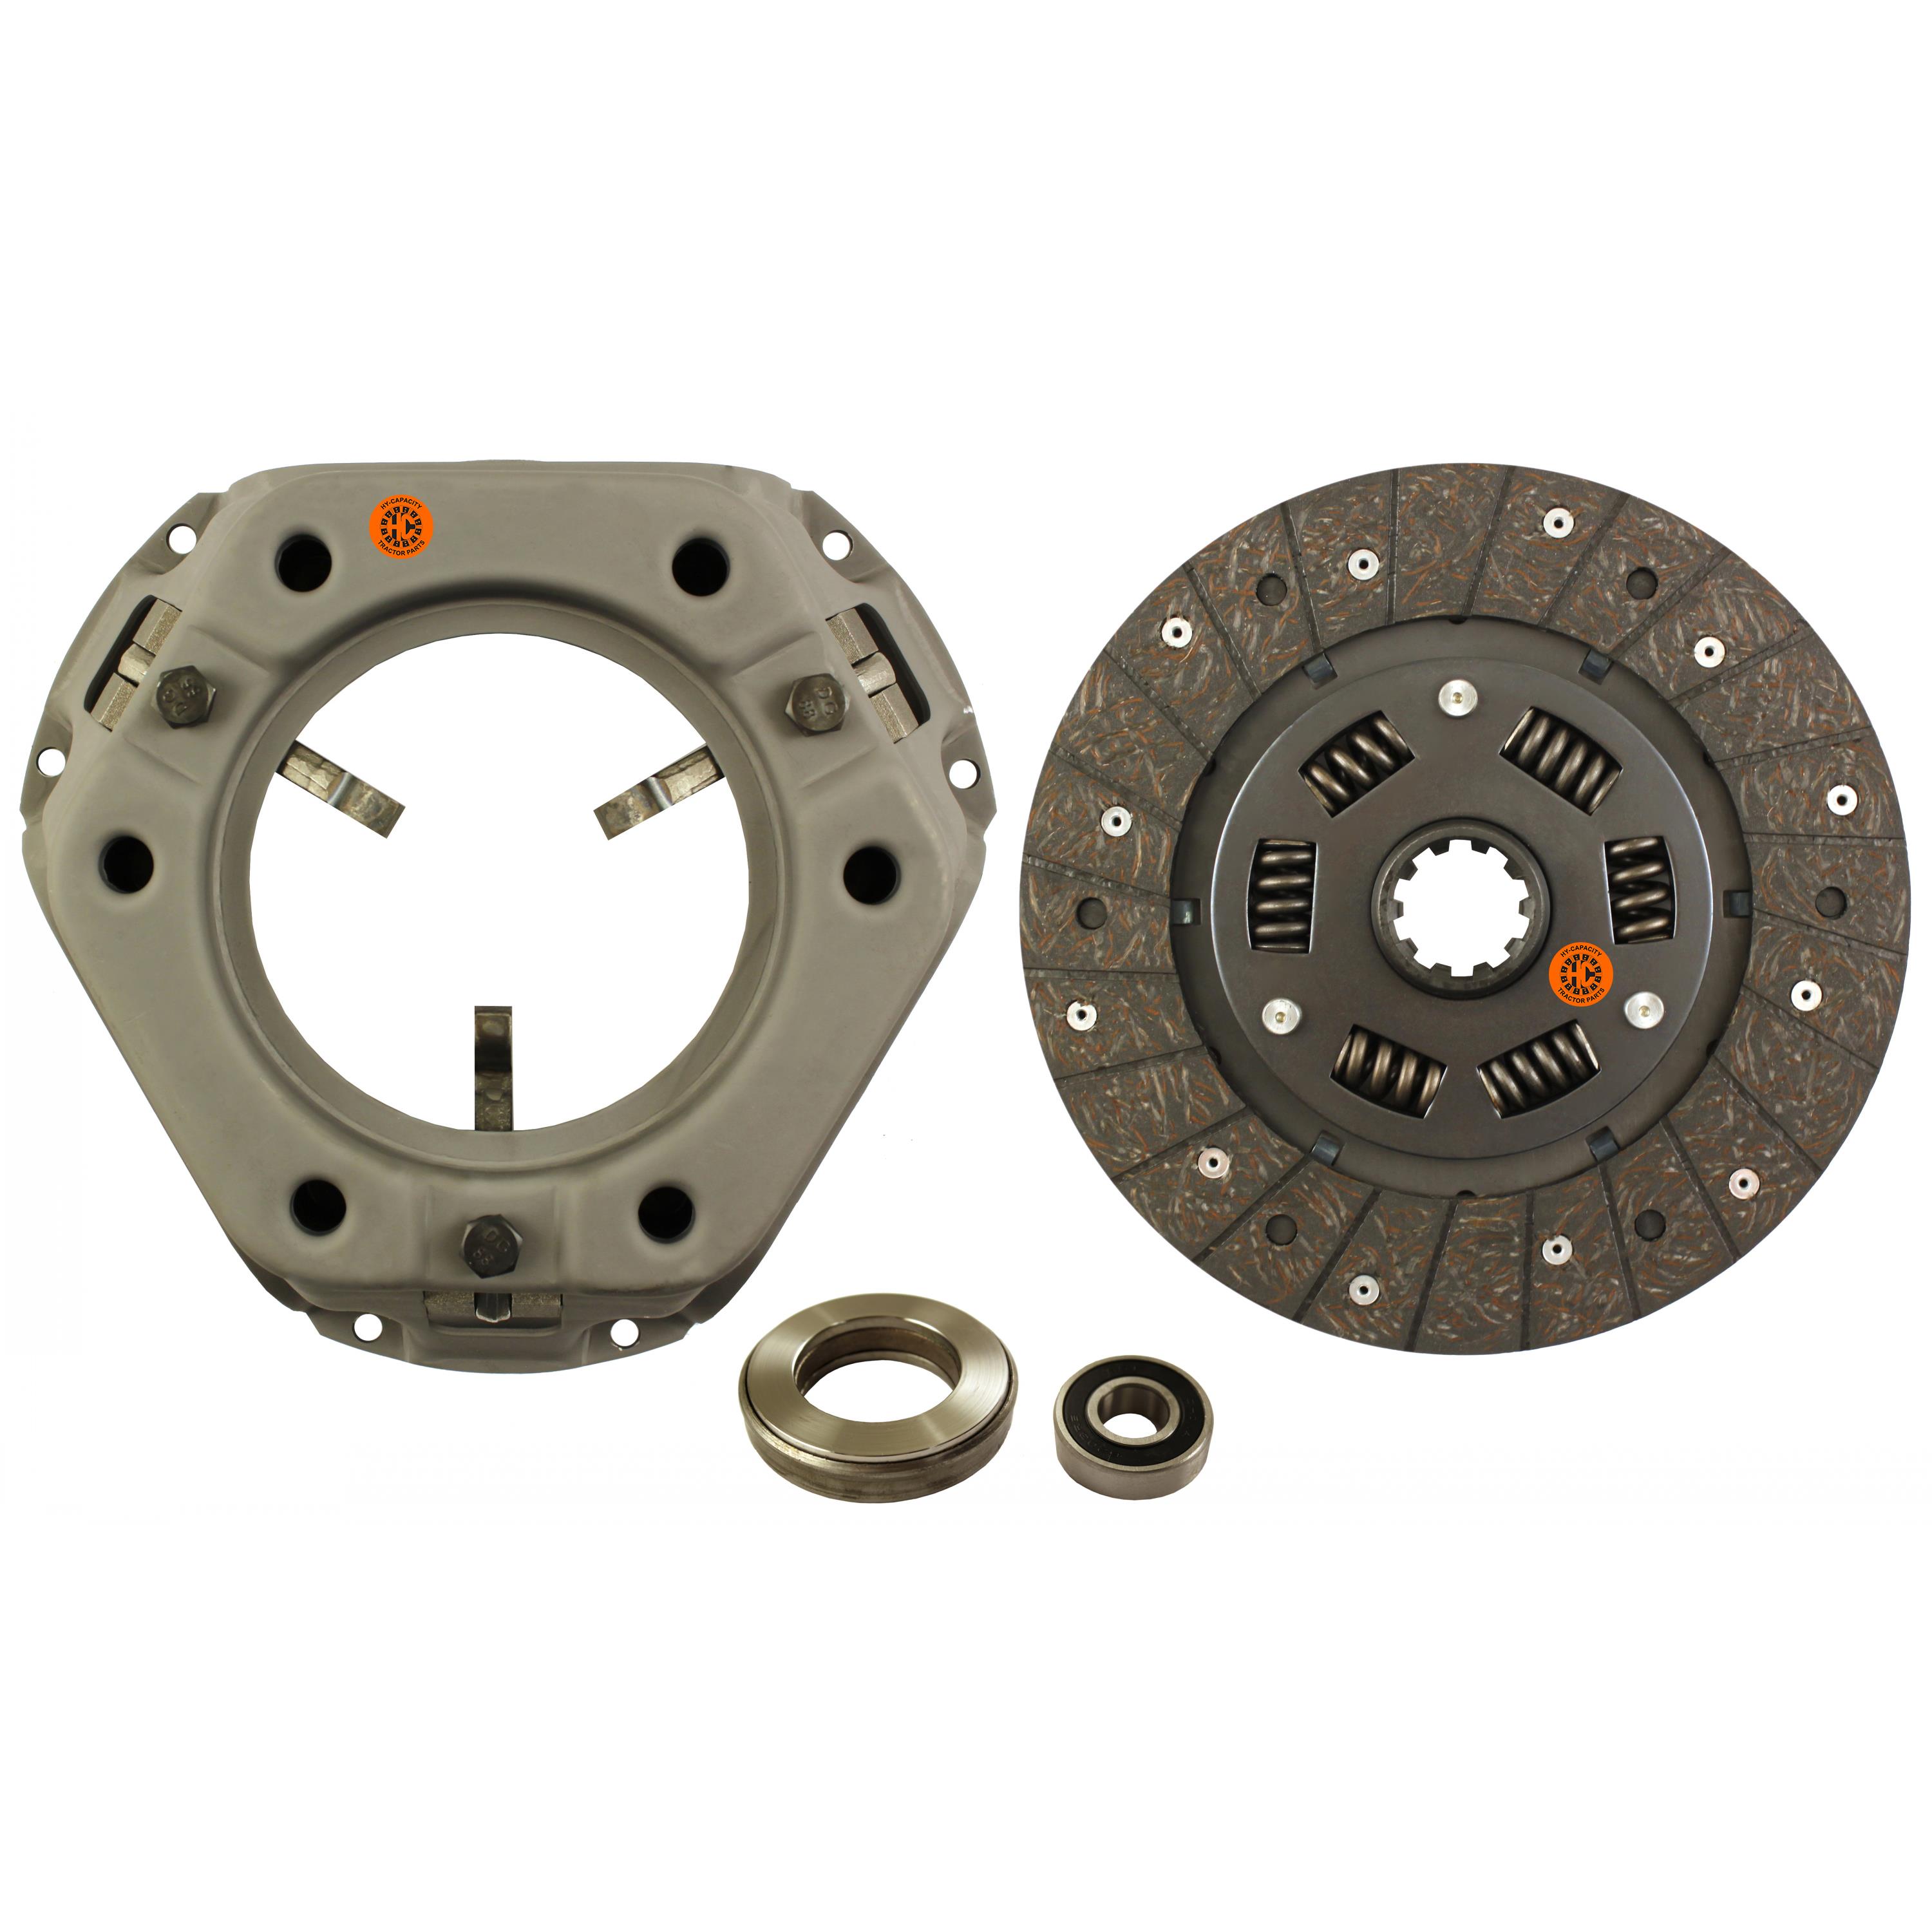 9 Inch Single Stage Clutch Kit, with Bearings, New